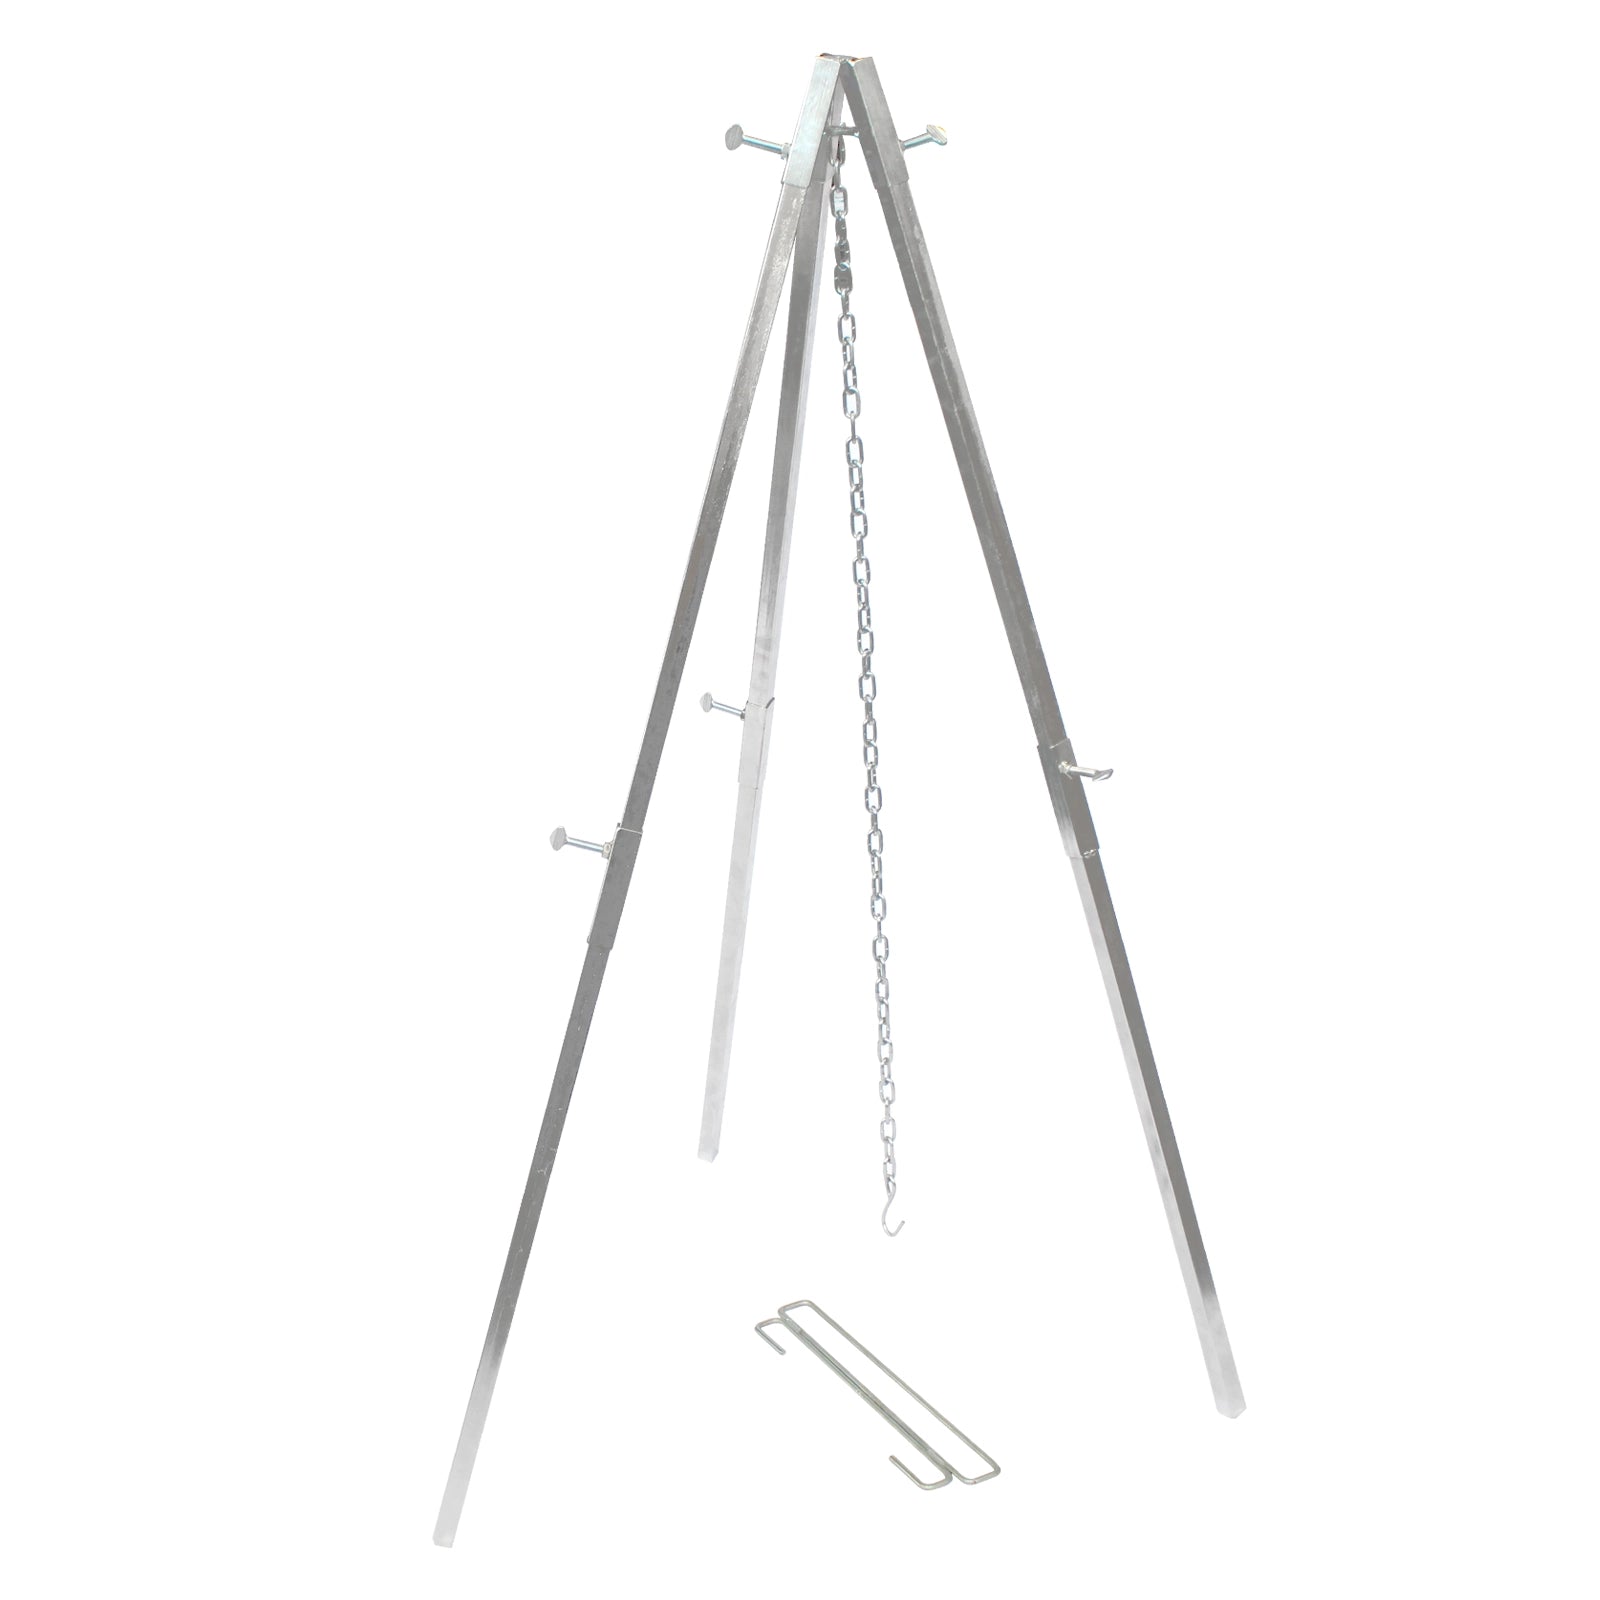 Steel Campfire Tripod for Outdoor Cooking